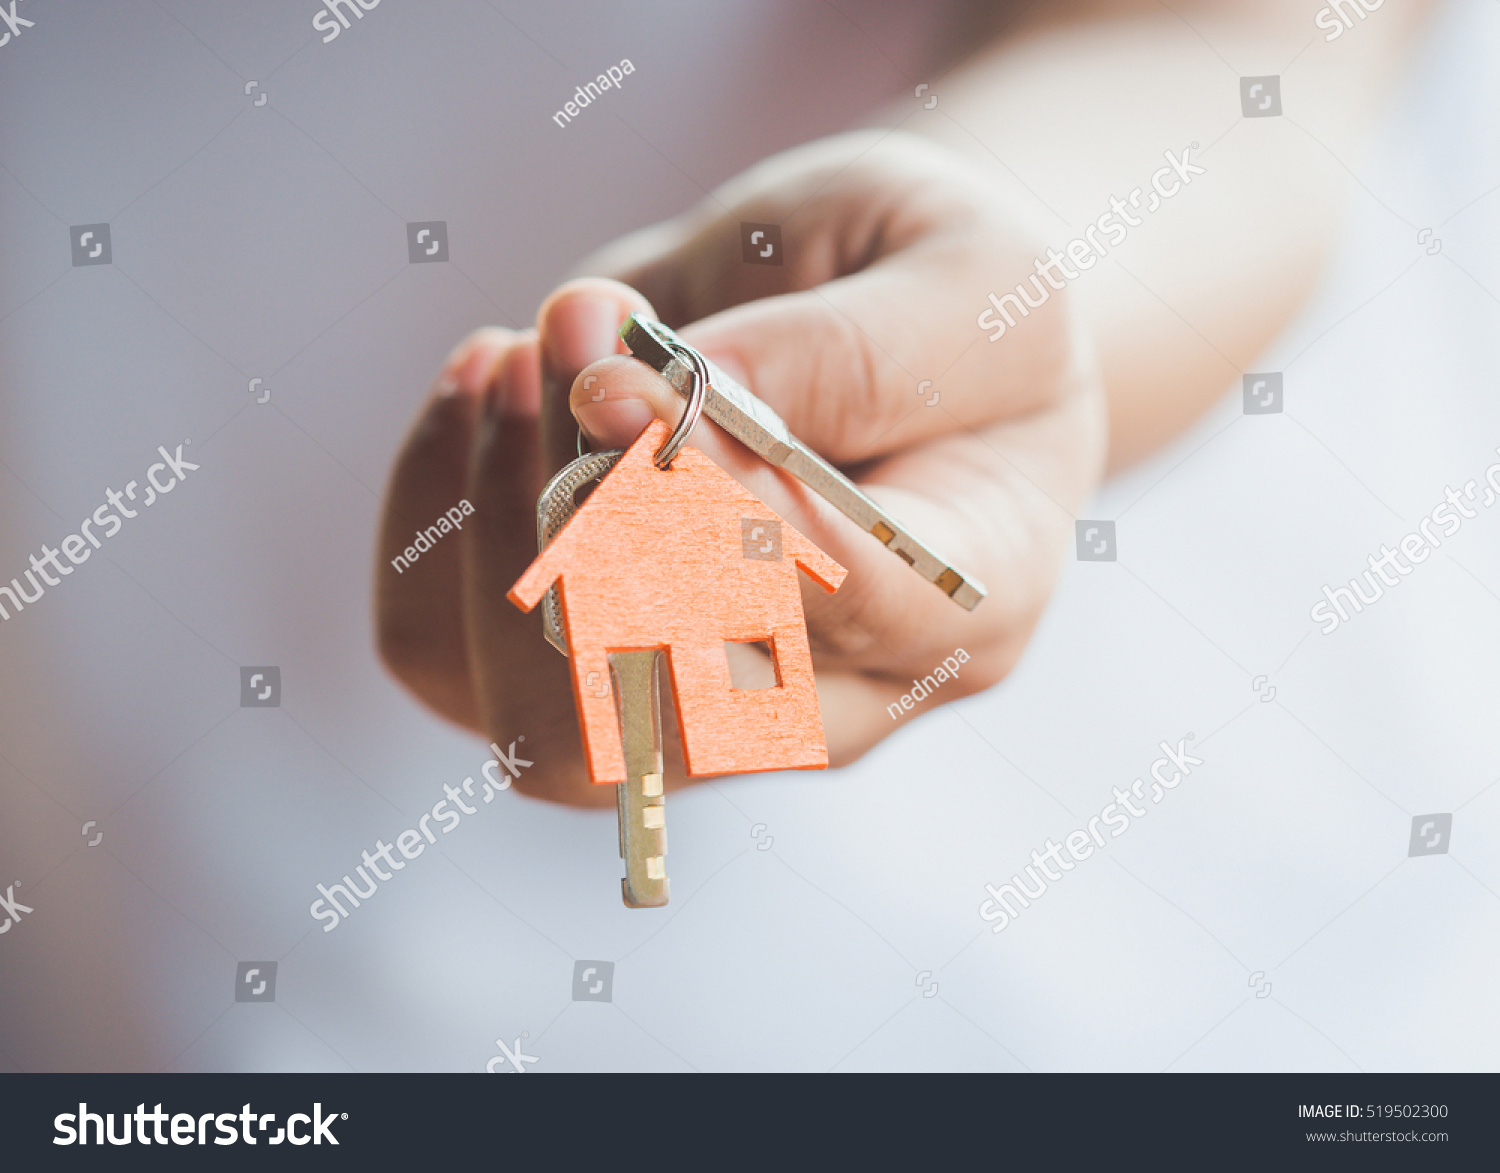 Female hand holding house key,real estate agent. #519502300